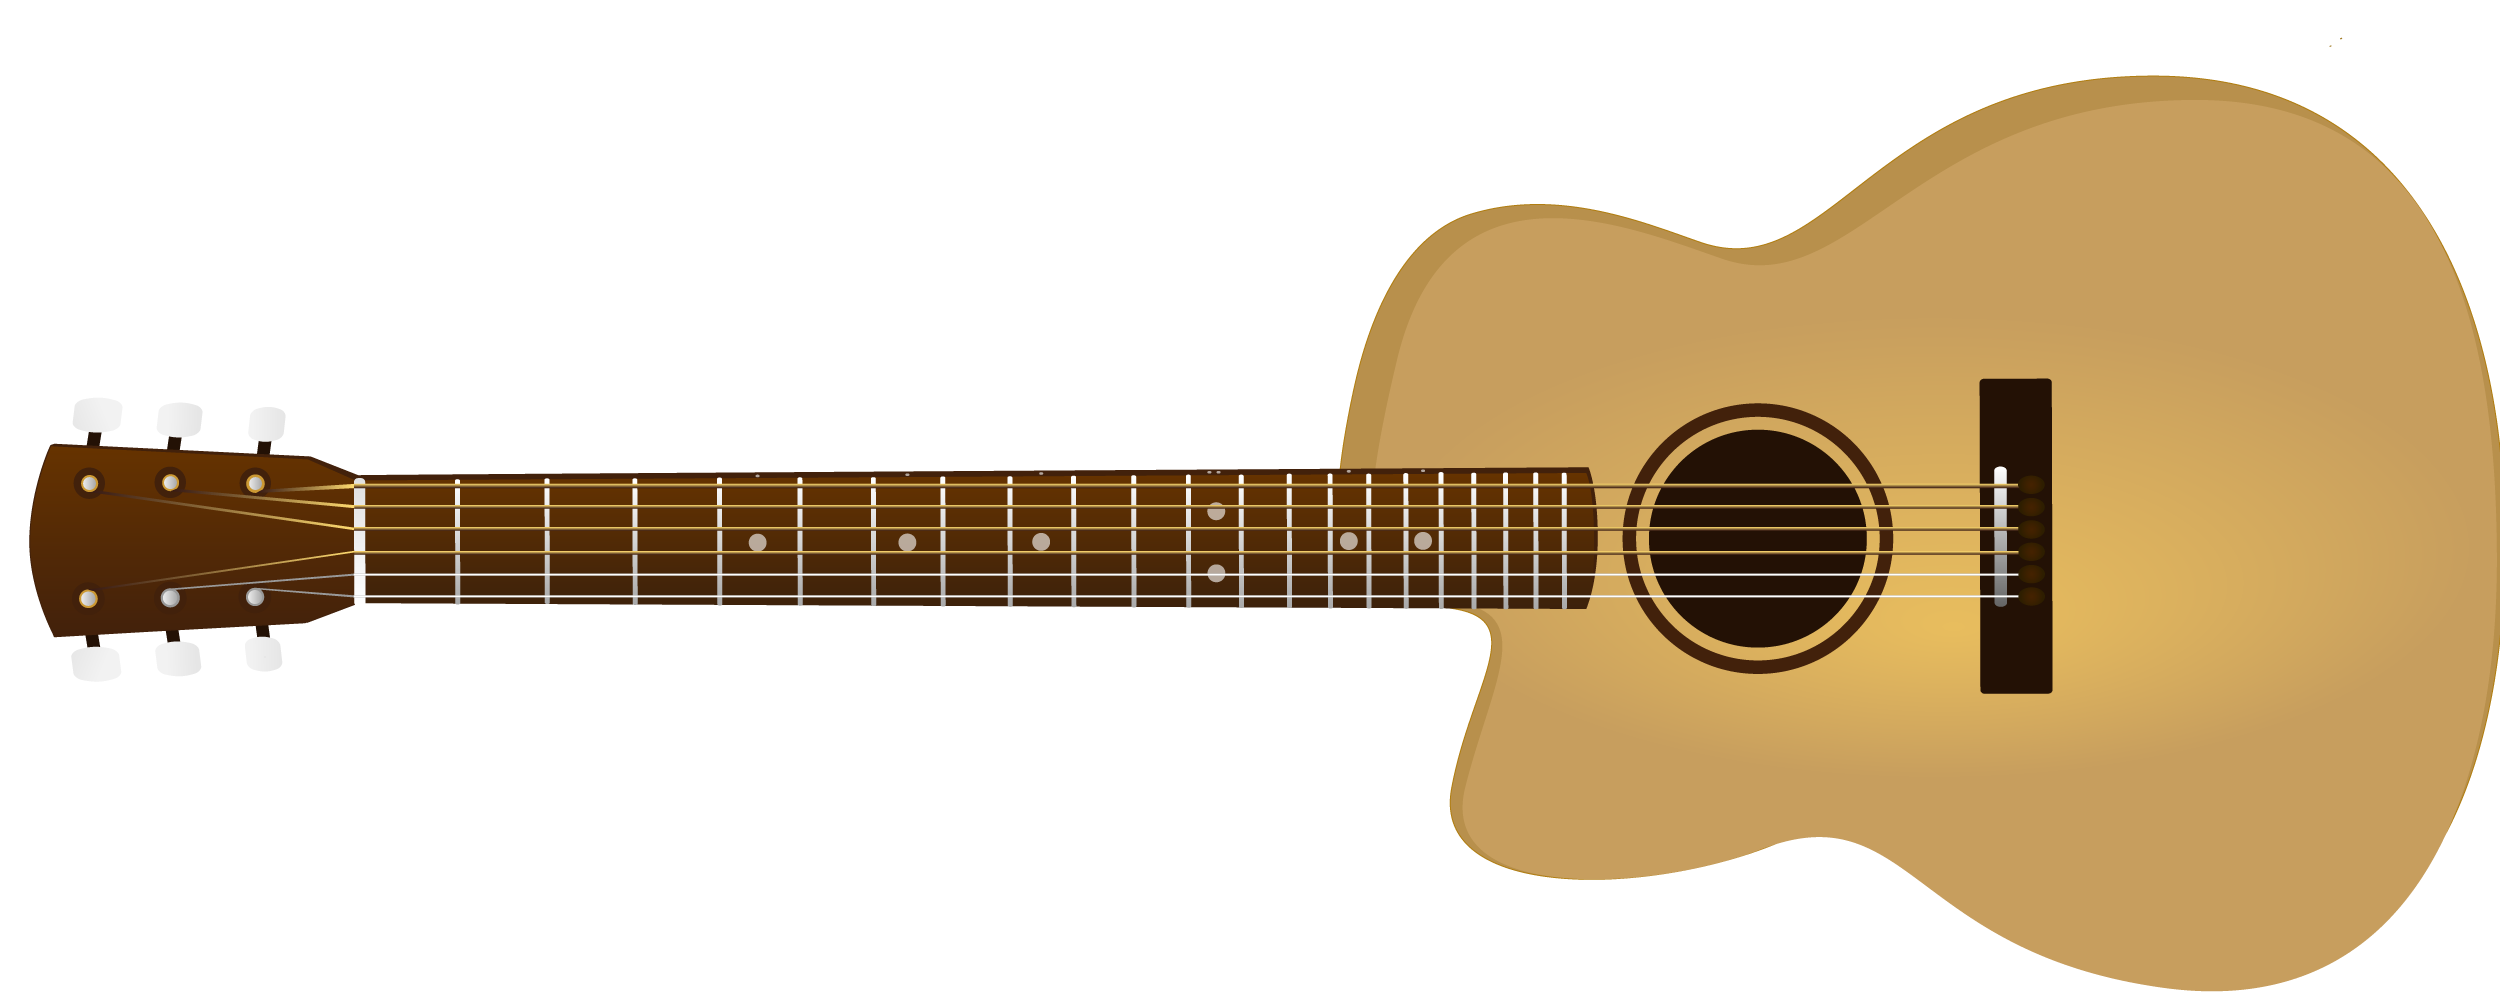 Guitar Acoustic Vector Free Download Image PNG Image